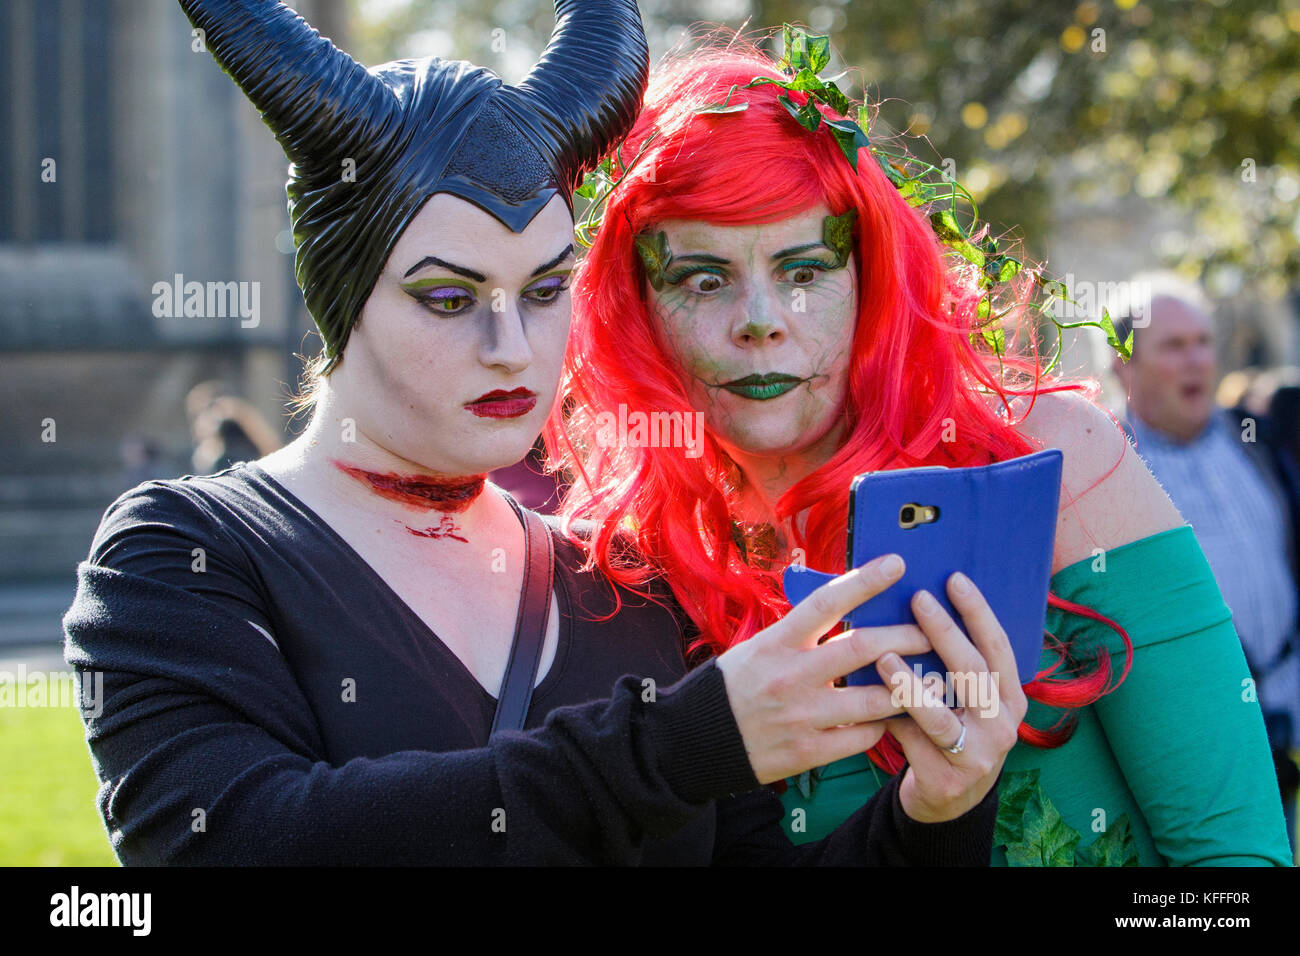 Bristol, UK. 28th Oct, 2017. Two women dressed in fancy dress are pictured as they pose for a selfie during a zombie walk in Bristol. Stock Photo